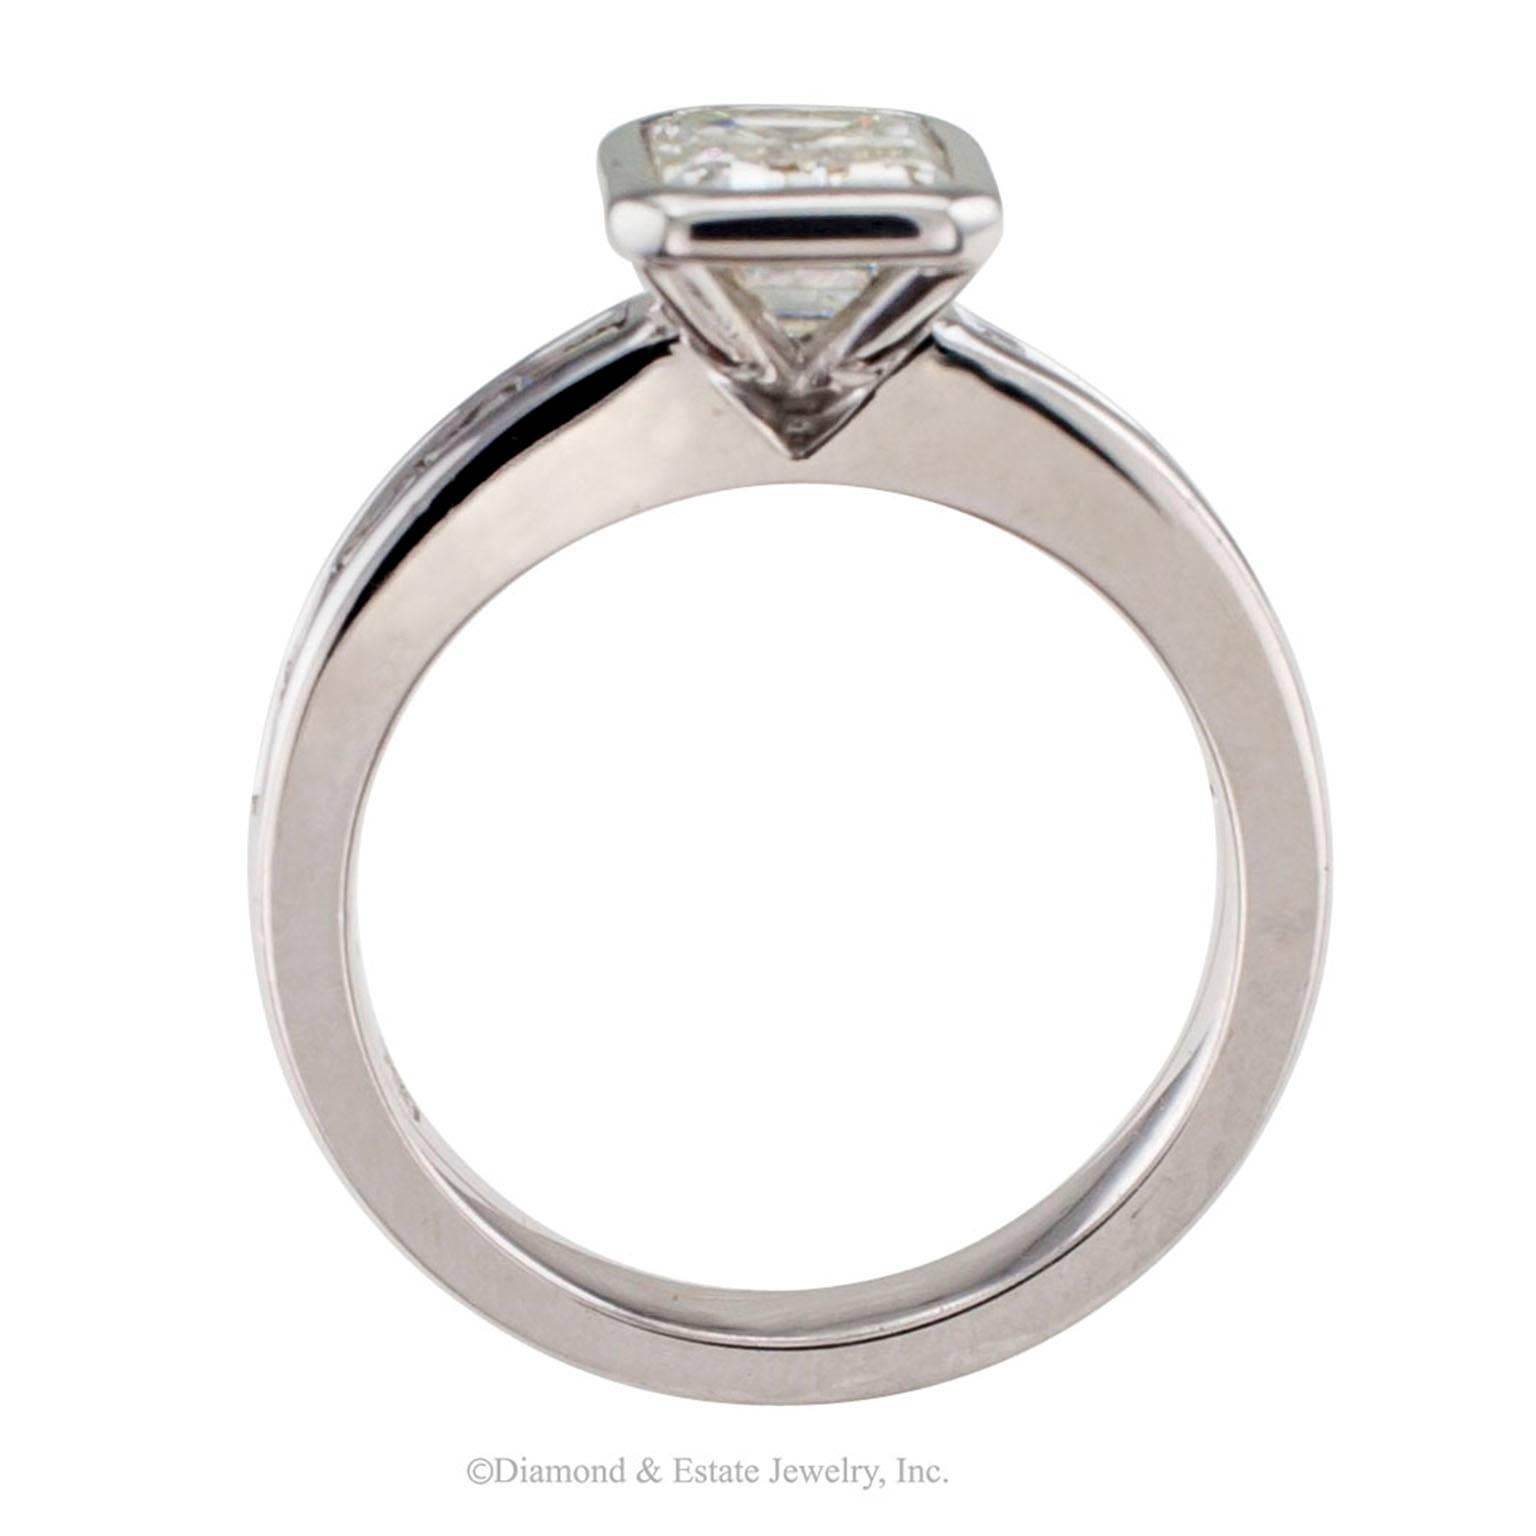 1.08 Carats Emerald Cut Diamond Gold Engagement Ring

Modernist  style 1.08 carats emerald cut diamond G - H color mounted in 18-karat white gold.  A very different take on presenting a beautiful diamond, bezel-set on prongs so that plenty of light